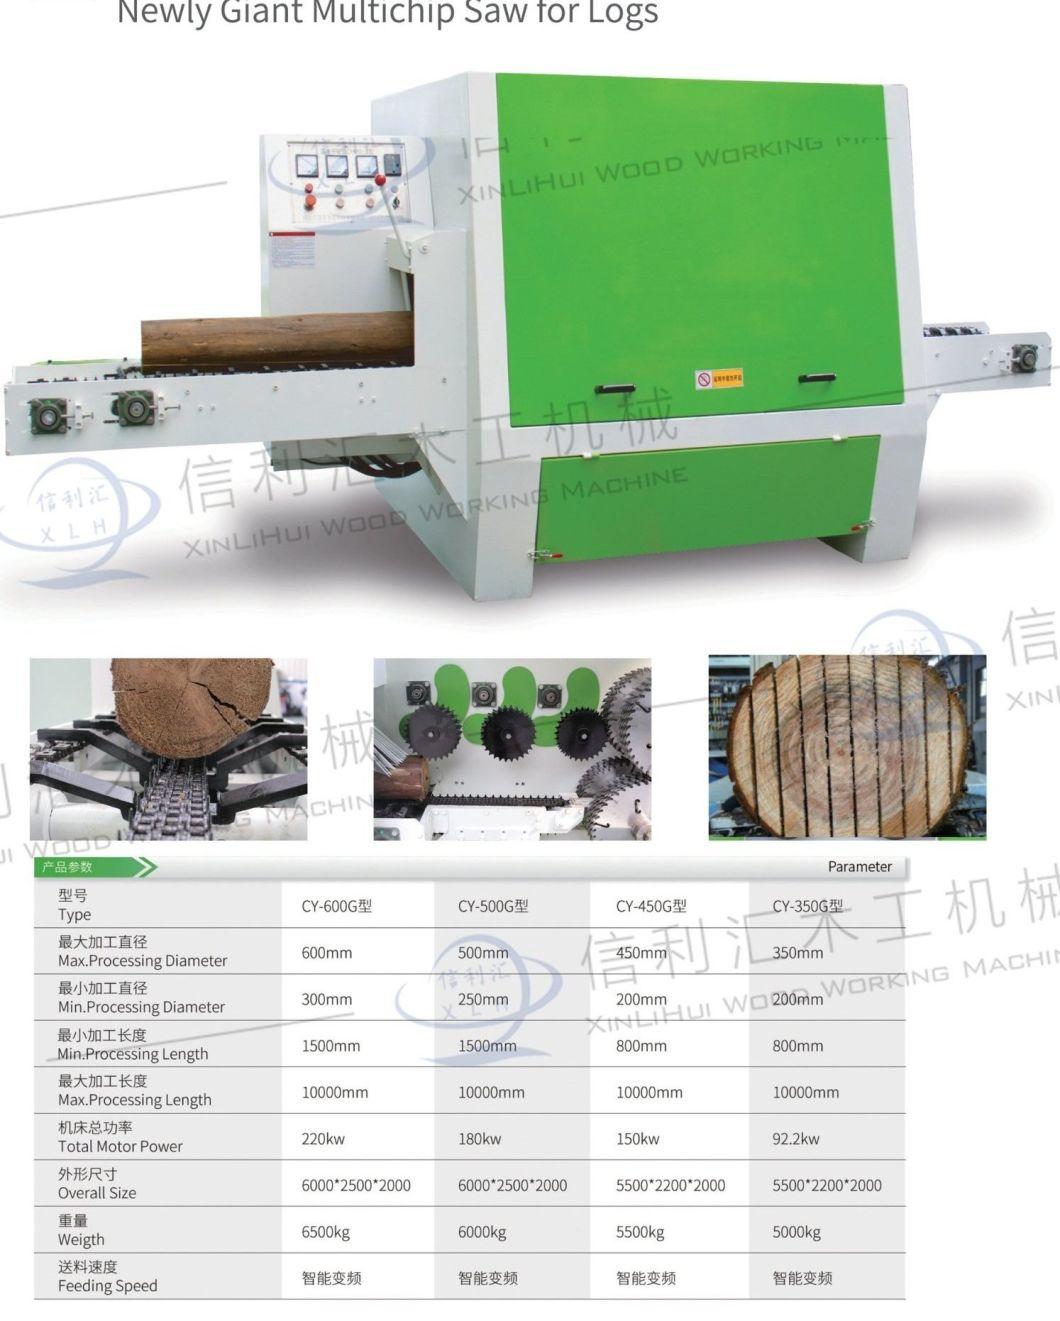 Hot Selling Multi-Blade Saw for Round Logs Ironwood, Wood Cutting Circular Gang Rip Saw with Good Price in India Market